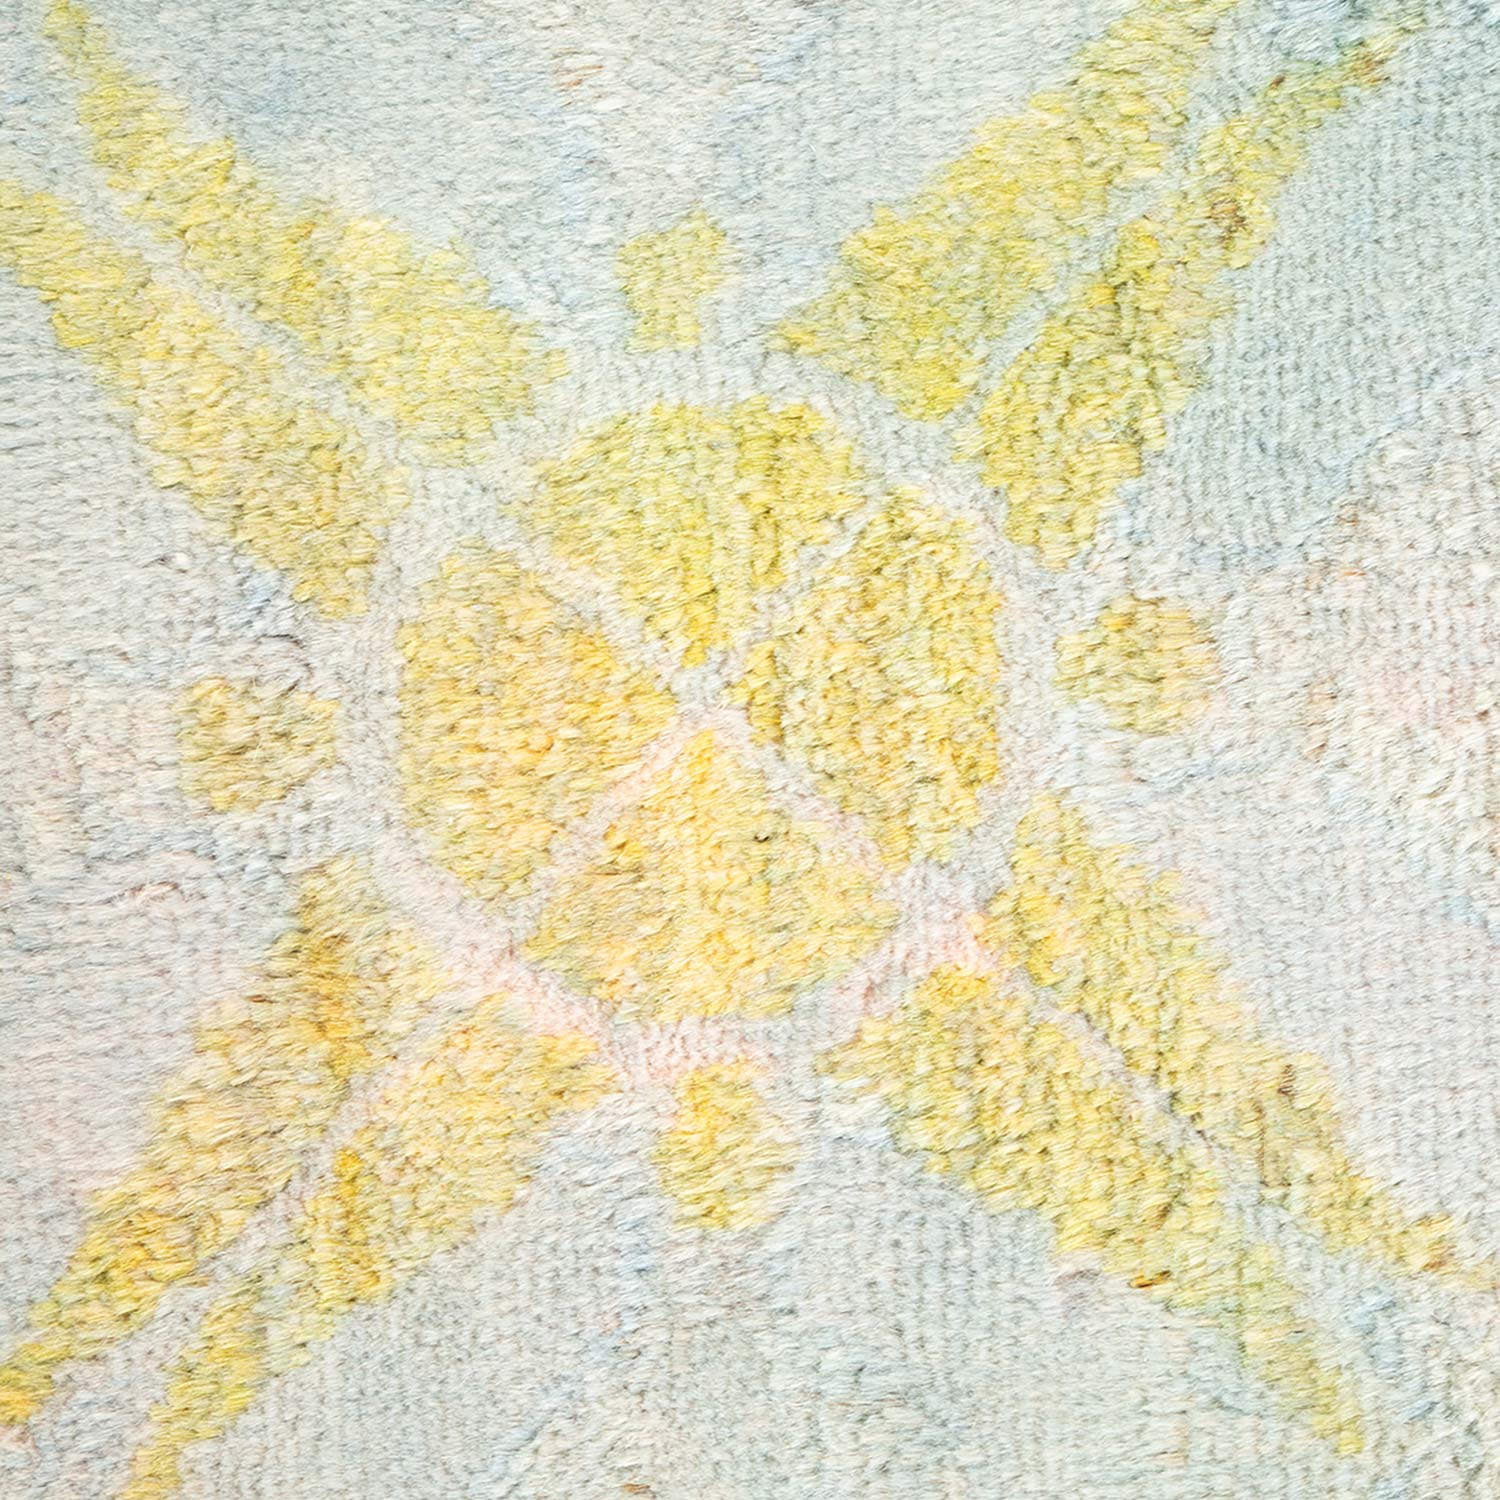 Close-up of a fluffy yellow textured carpet with symmetrical pattern